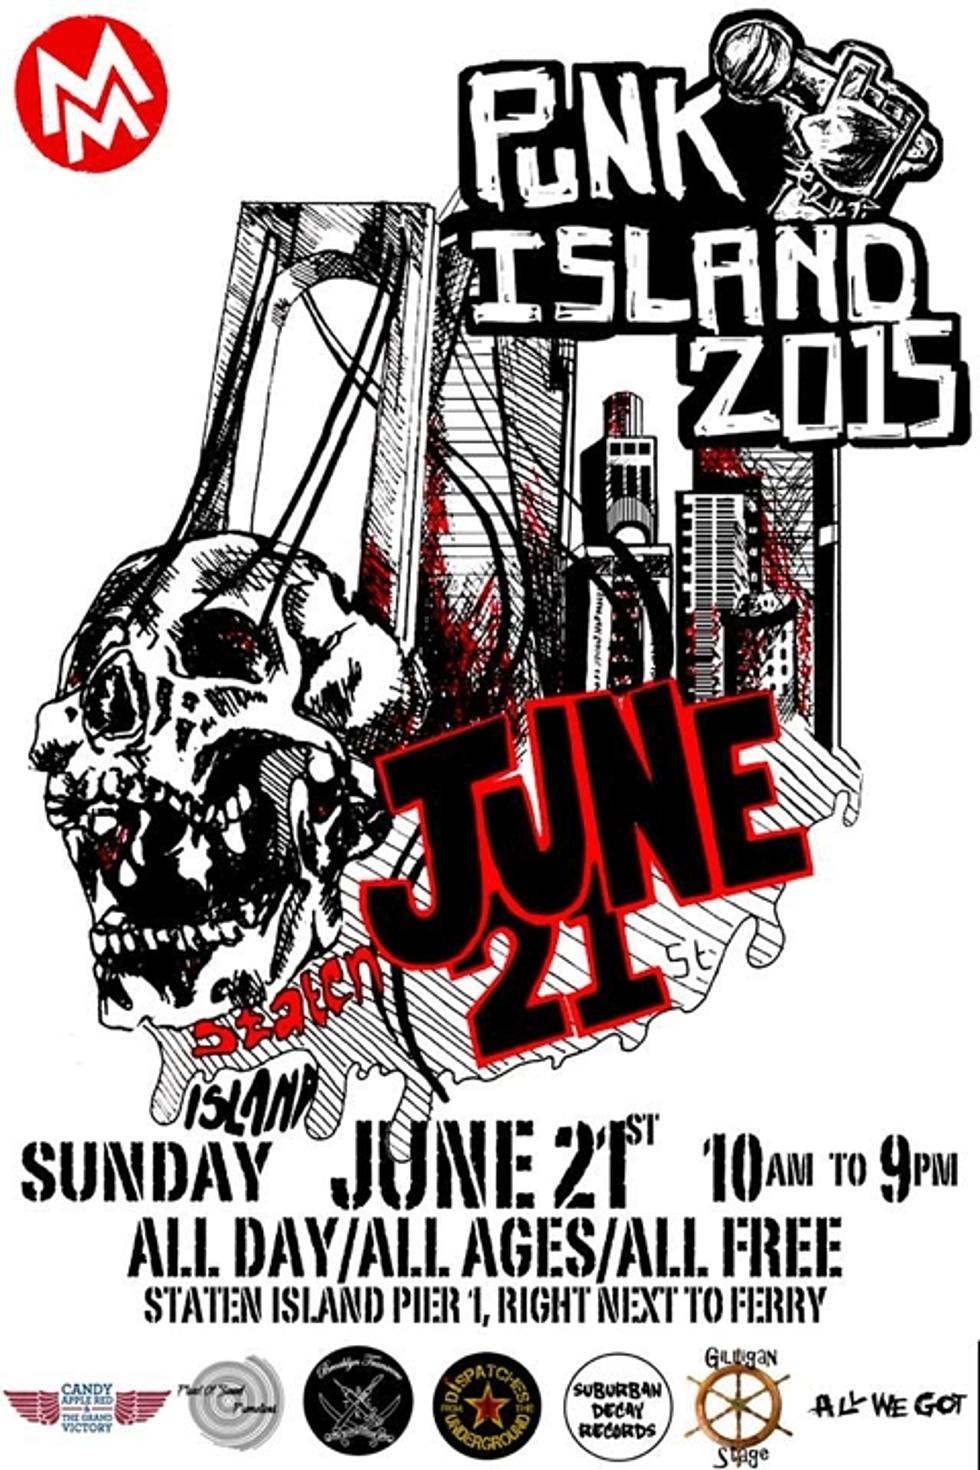 Punk Island 2015 is this weekend on Staten Island (lineup)